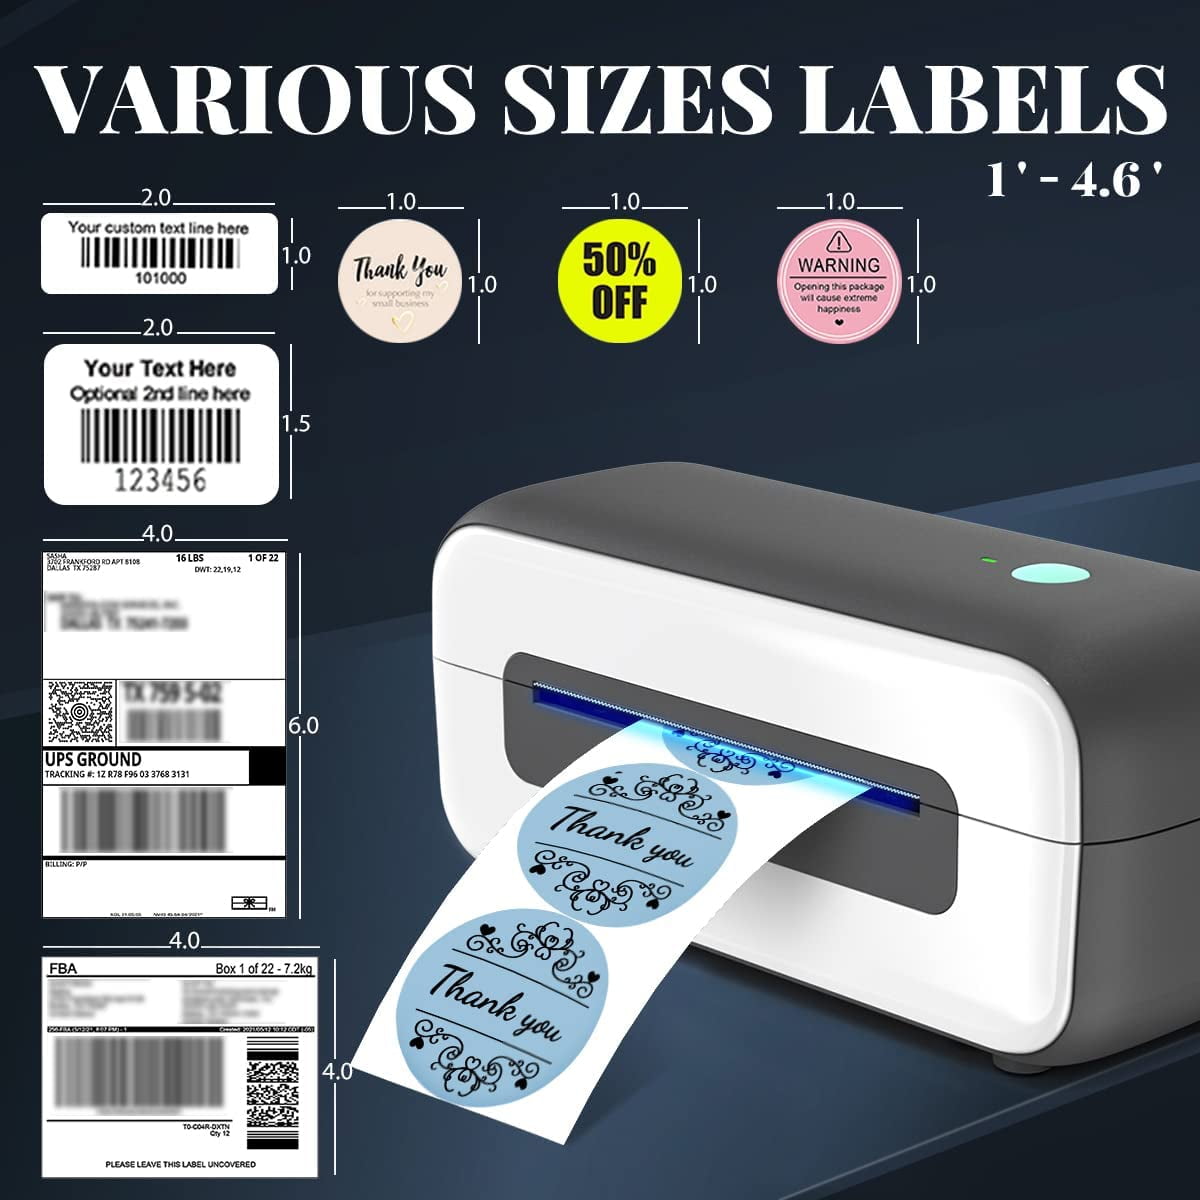 Phomemo Shipping Label Printer for Shipping Packages, Desktop USB 4x6 Thermal labels Printer Label Maker Compatible with USPS, UPS, Shopify, Ebay, Etsy, ShippingEasy -